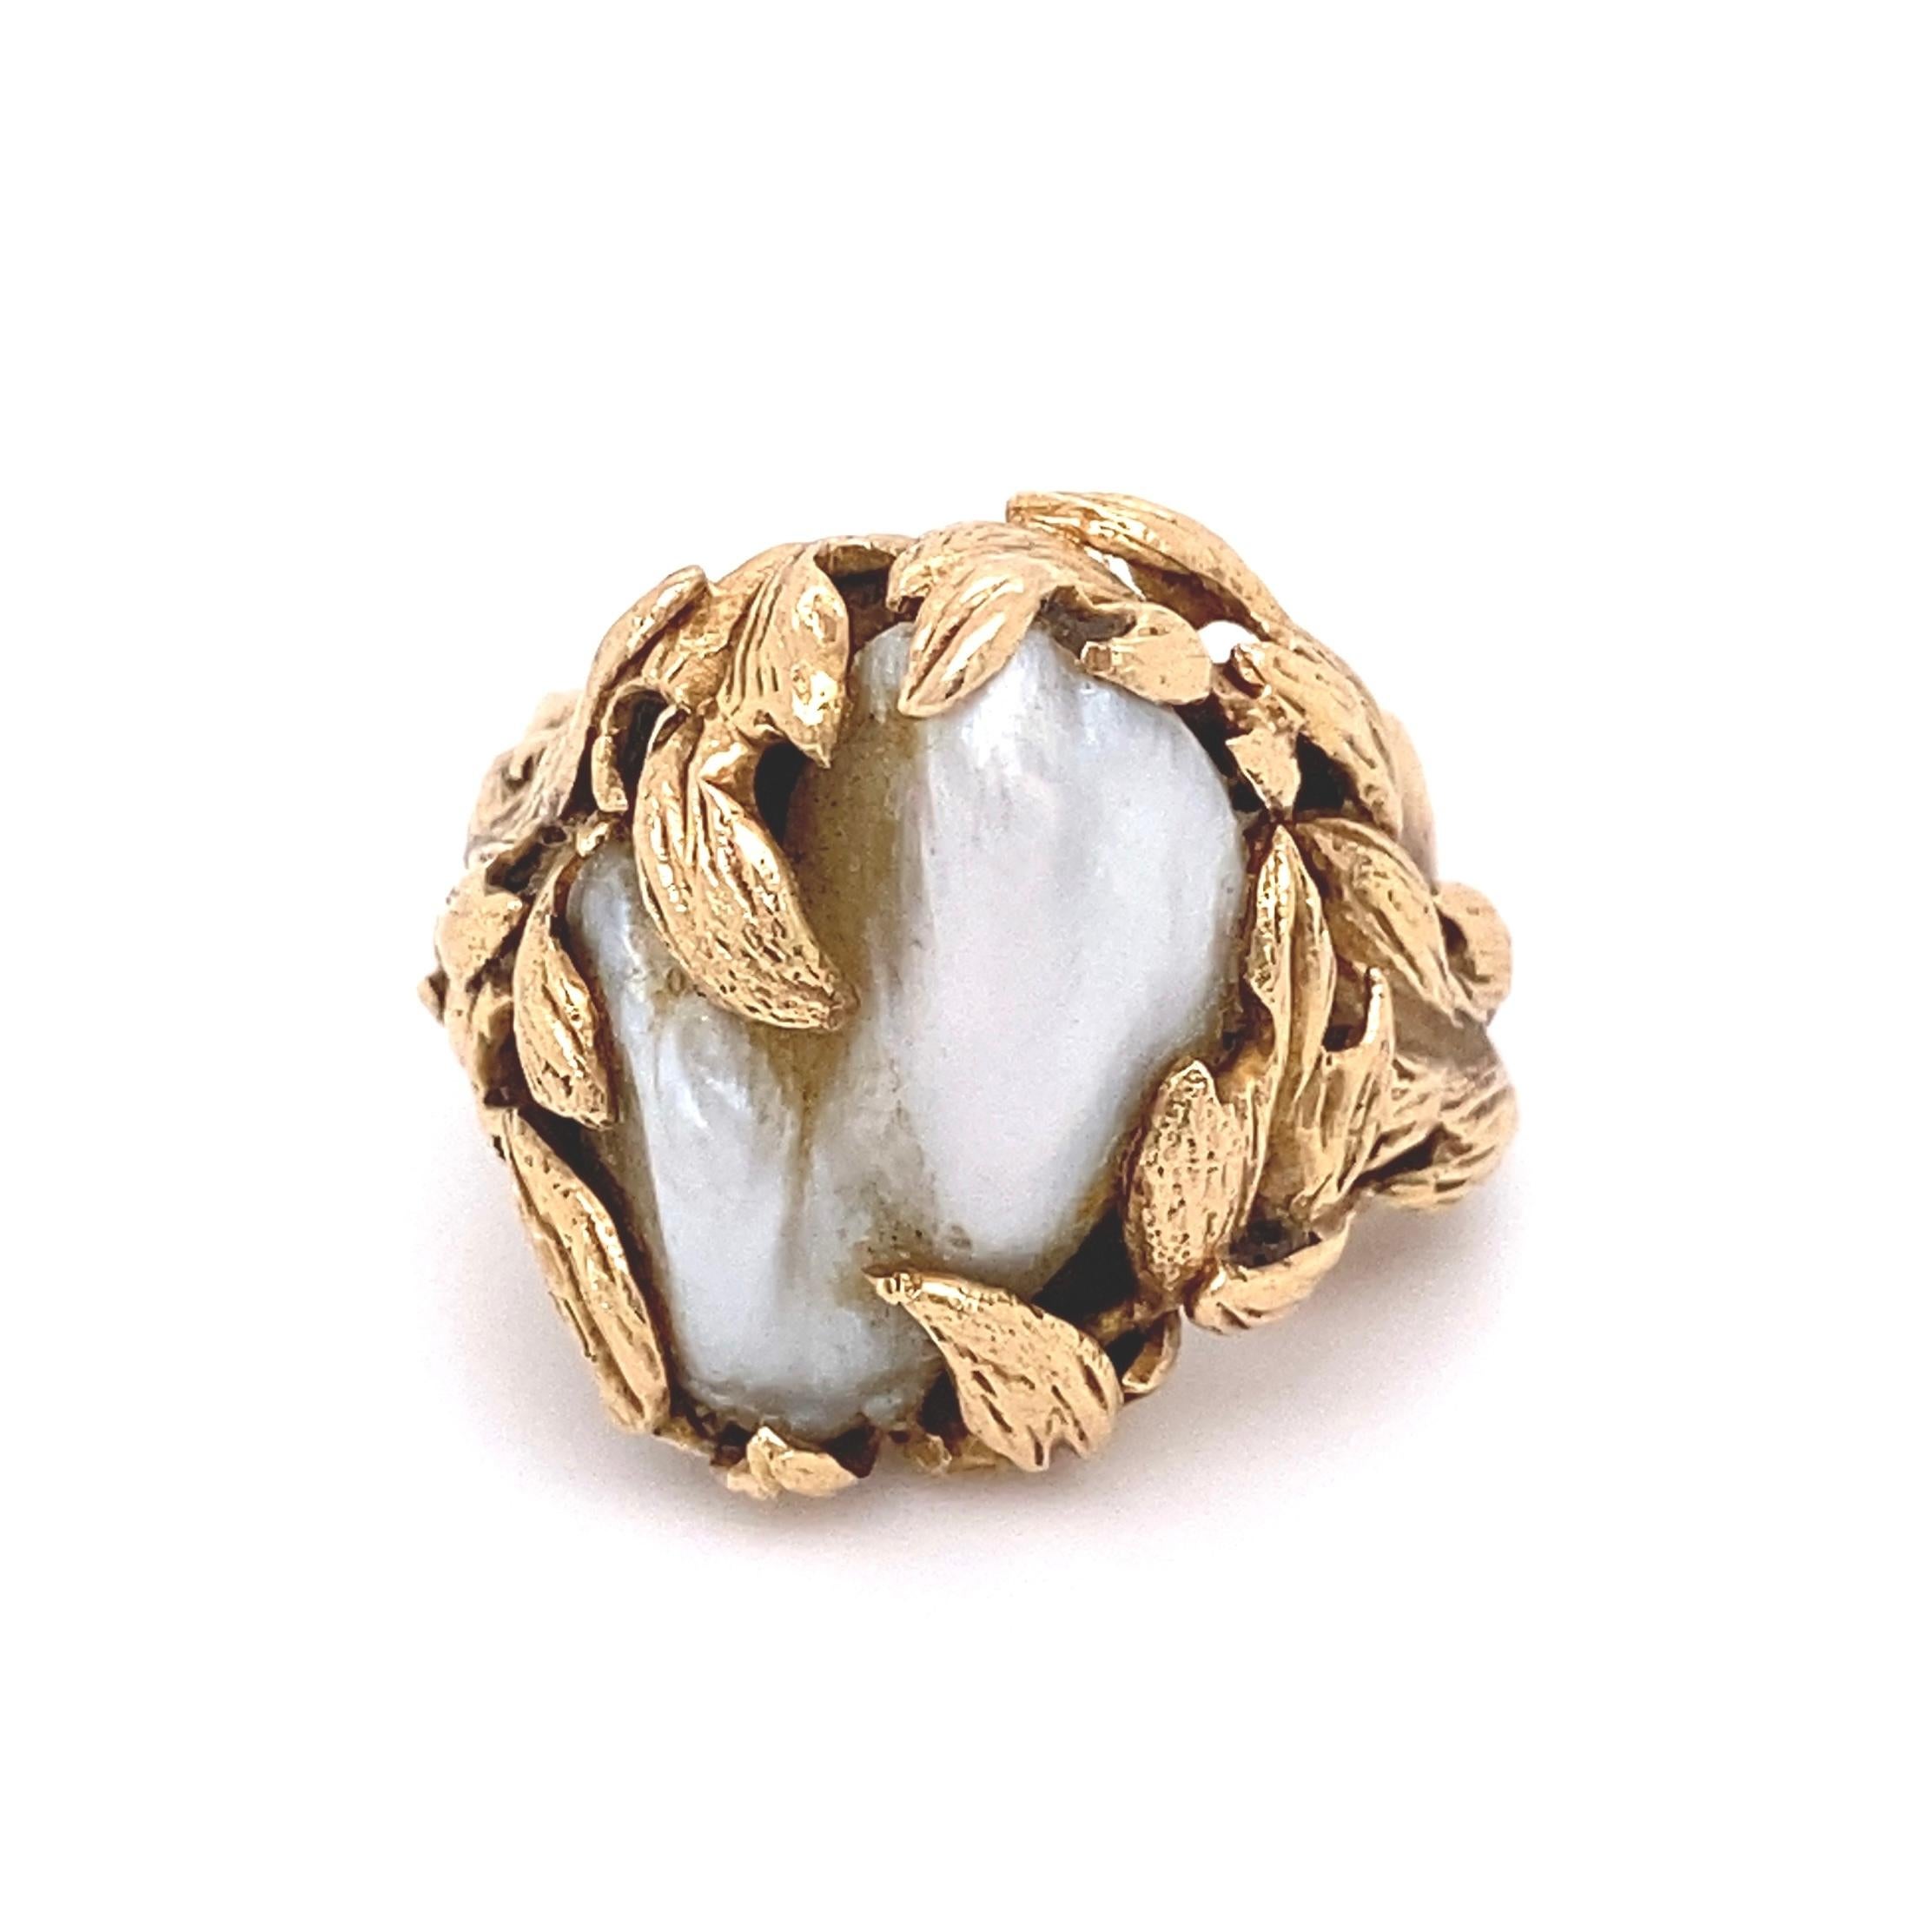 Beautiful and Stylish Baroque Pearl in Yellow Gold Leaves Design Ring. Measuring approx. 1.18